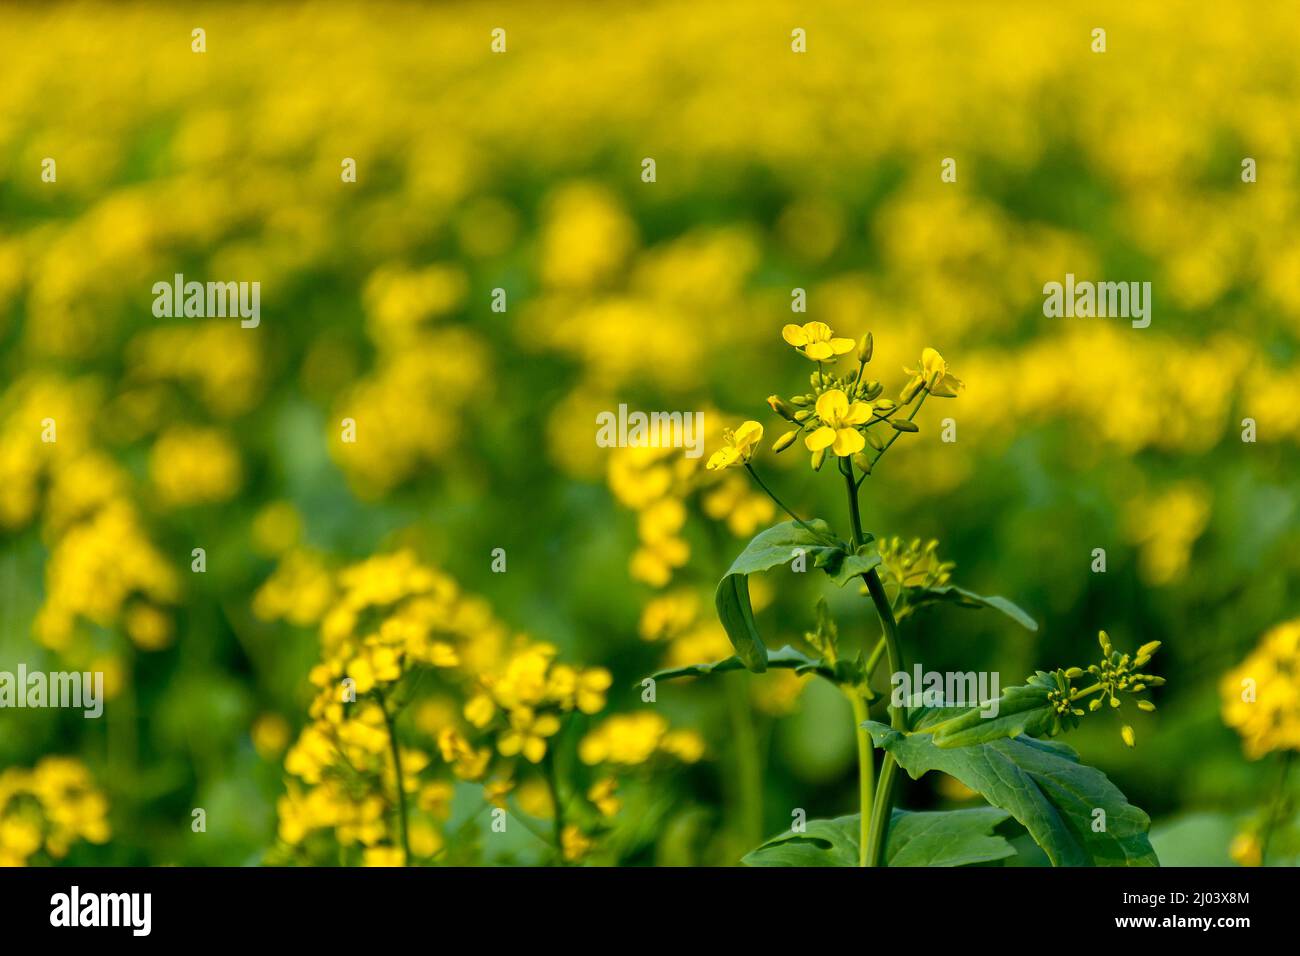 Yellow Mustard Flower, Brassica Field with a Single Flower Bud in Focus Stock Photo